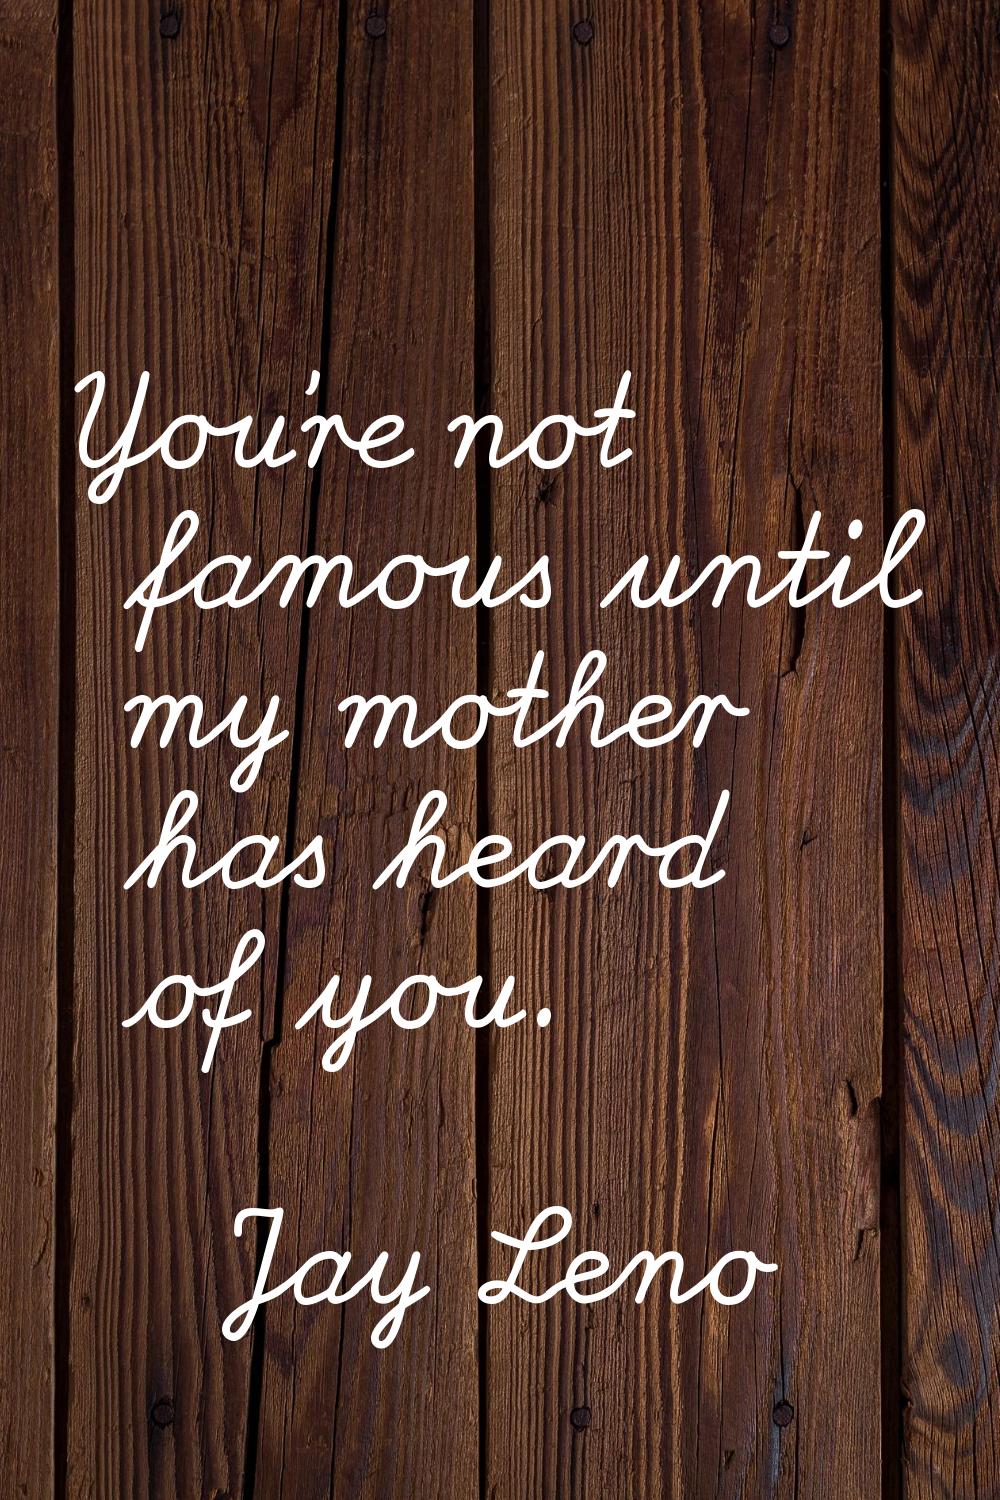 You're not famous until my mother has heard of you.